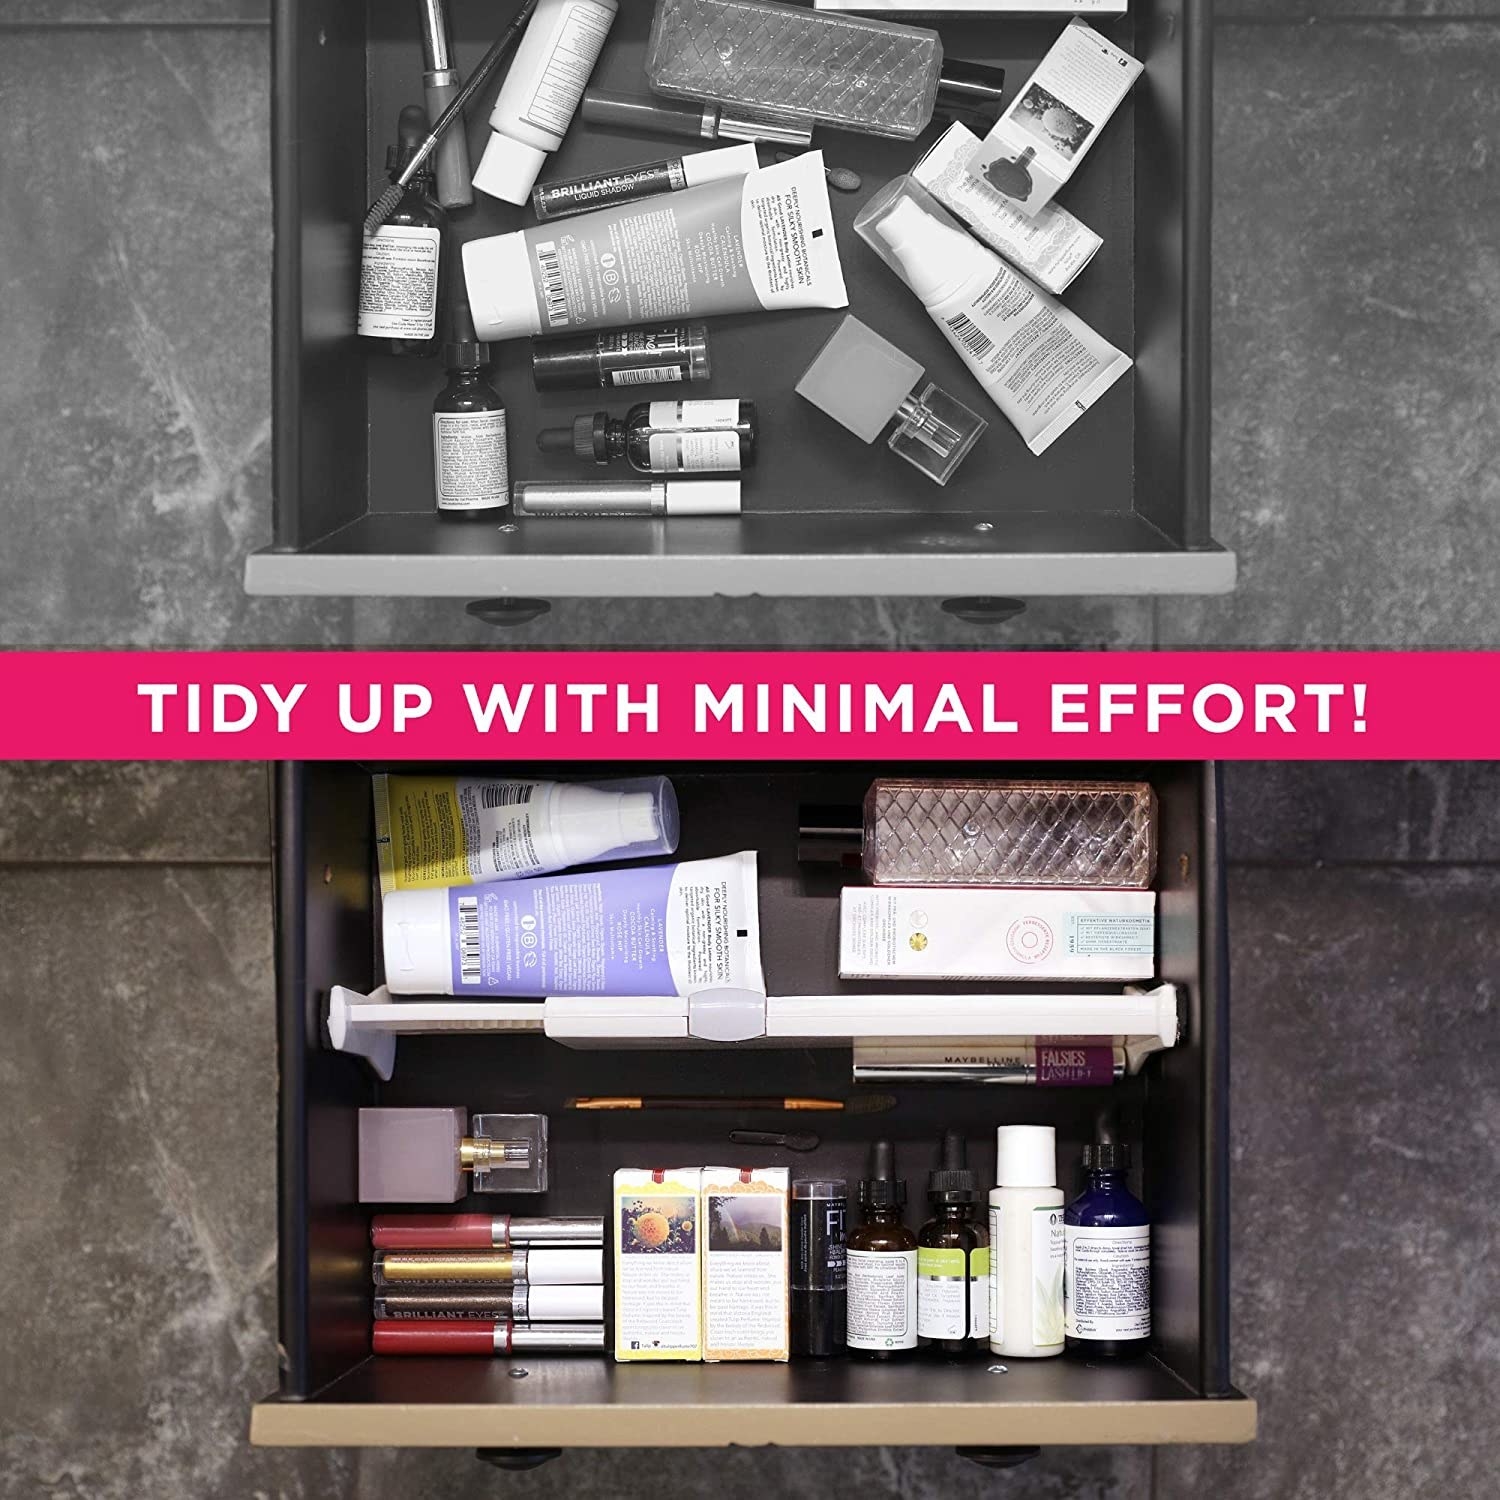 The same drawer shown before and after being organised with adjustable drawer dividers - filled with makeup products.